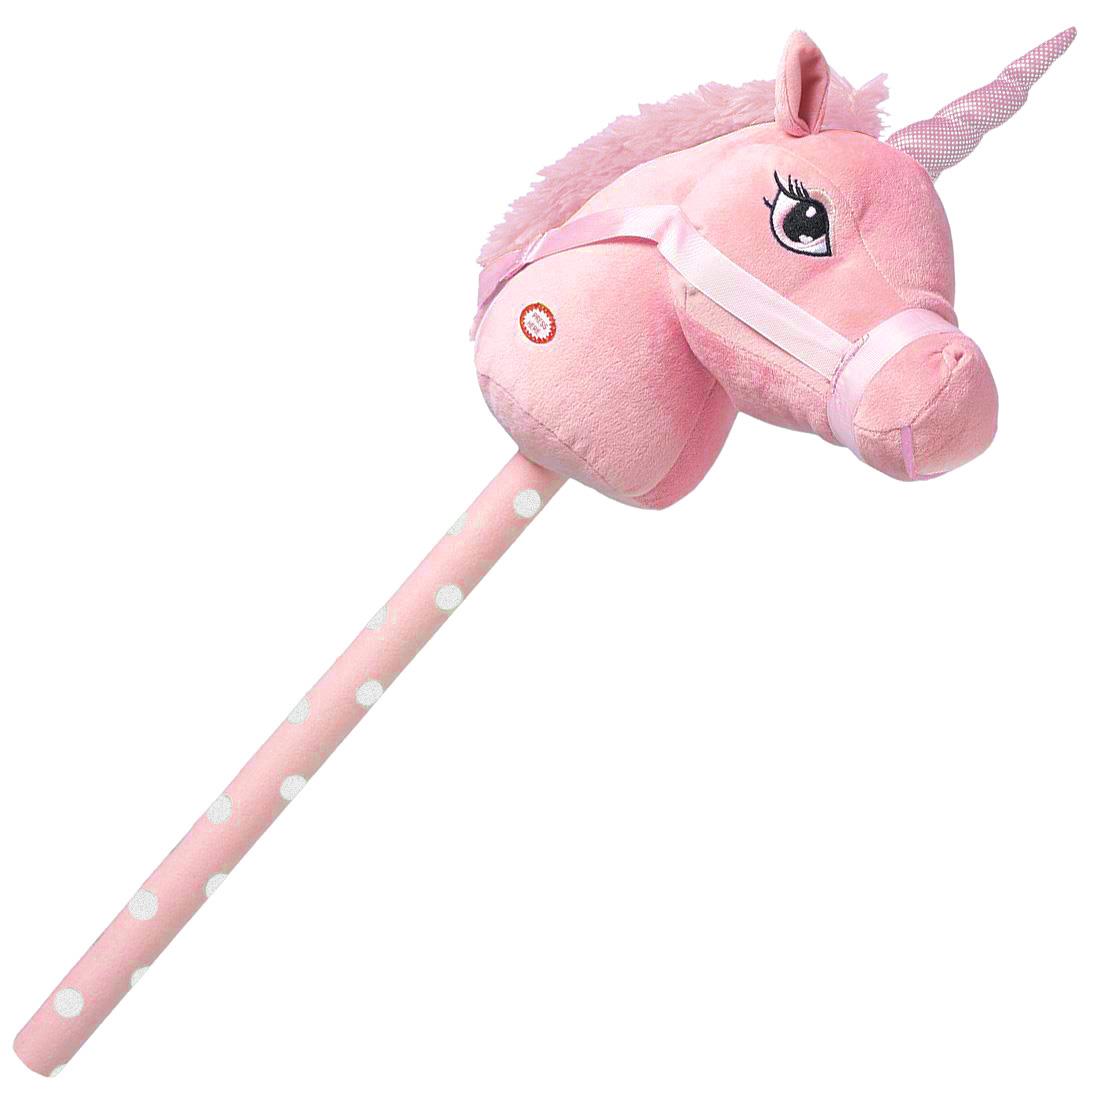 Pink Hobby Horse by The Magic Toy Shop - The Magic Toy Shop